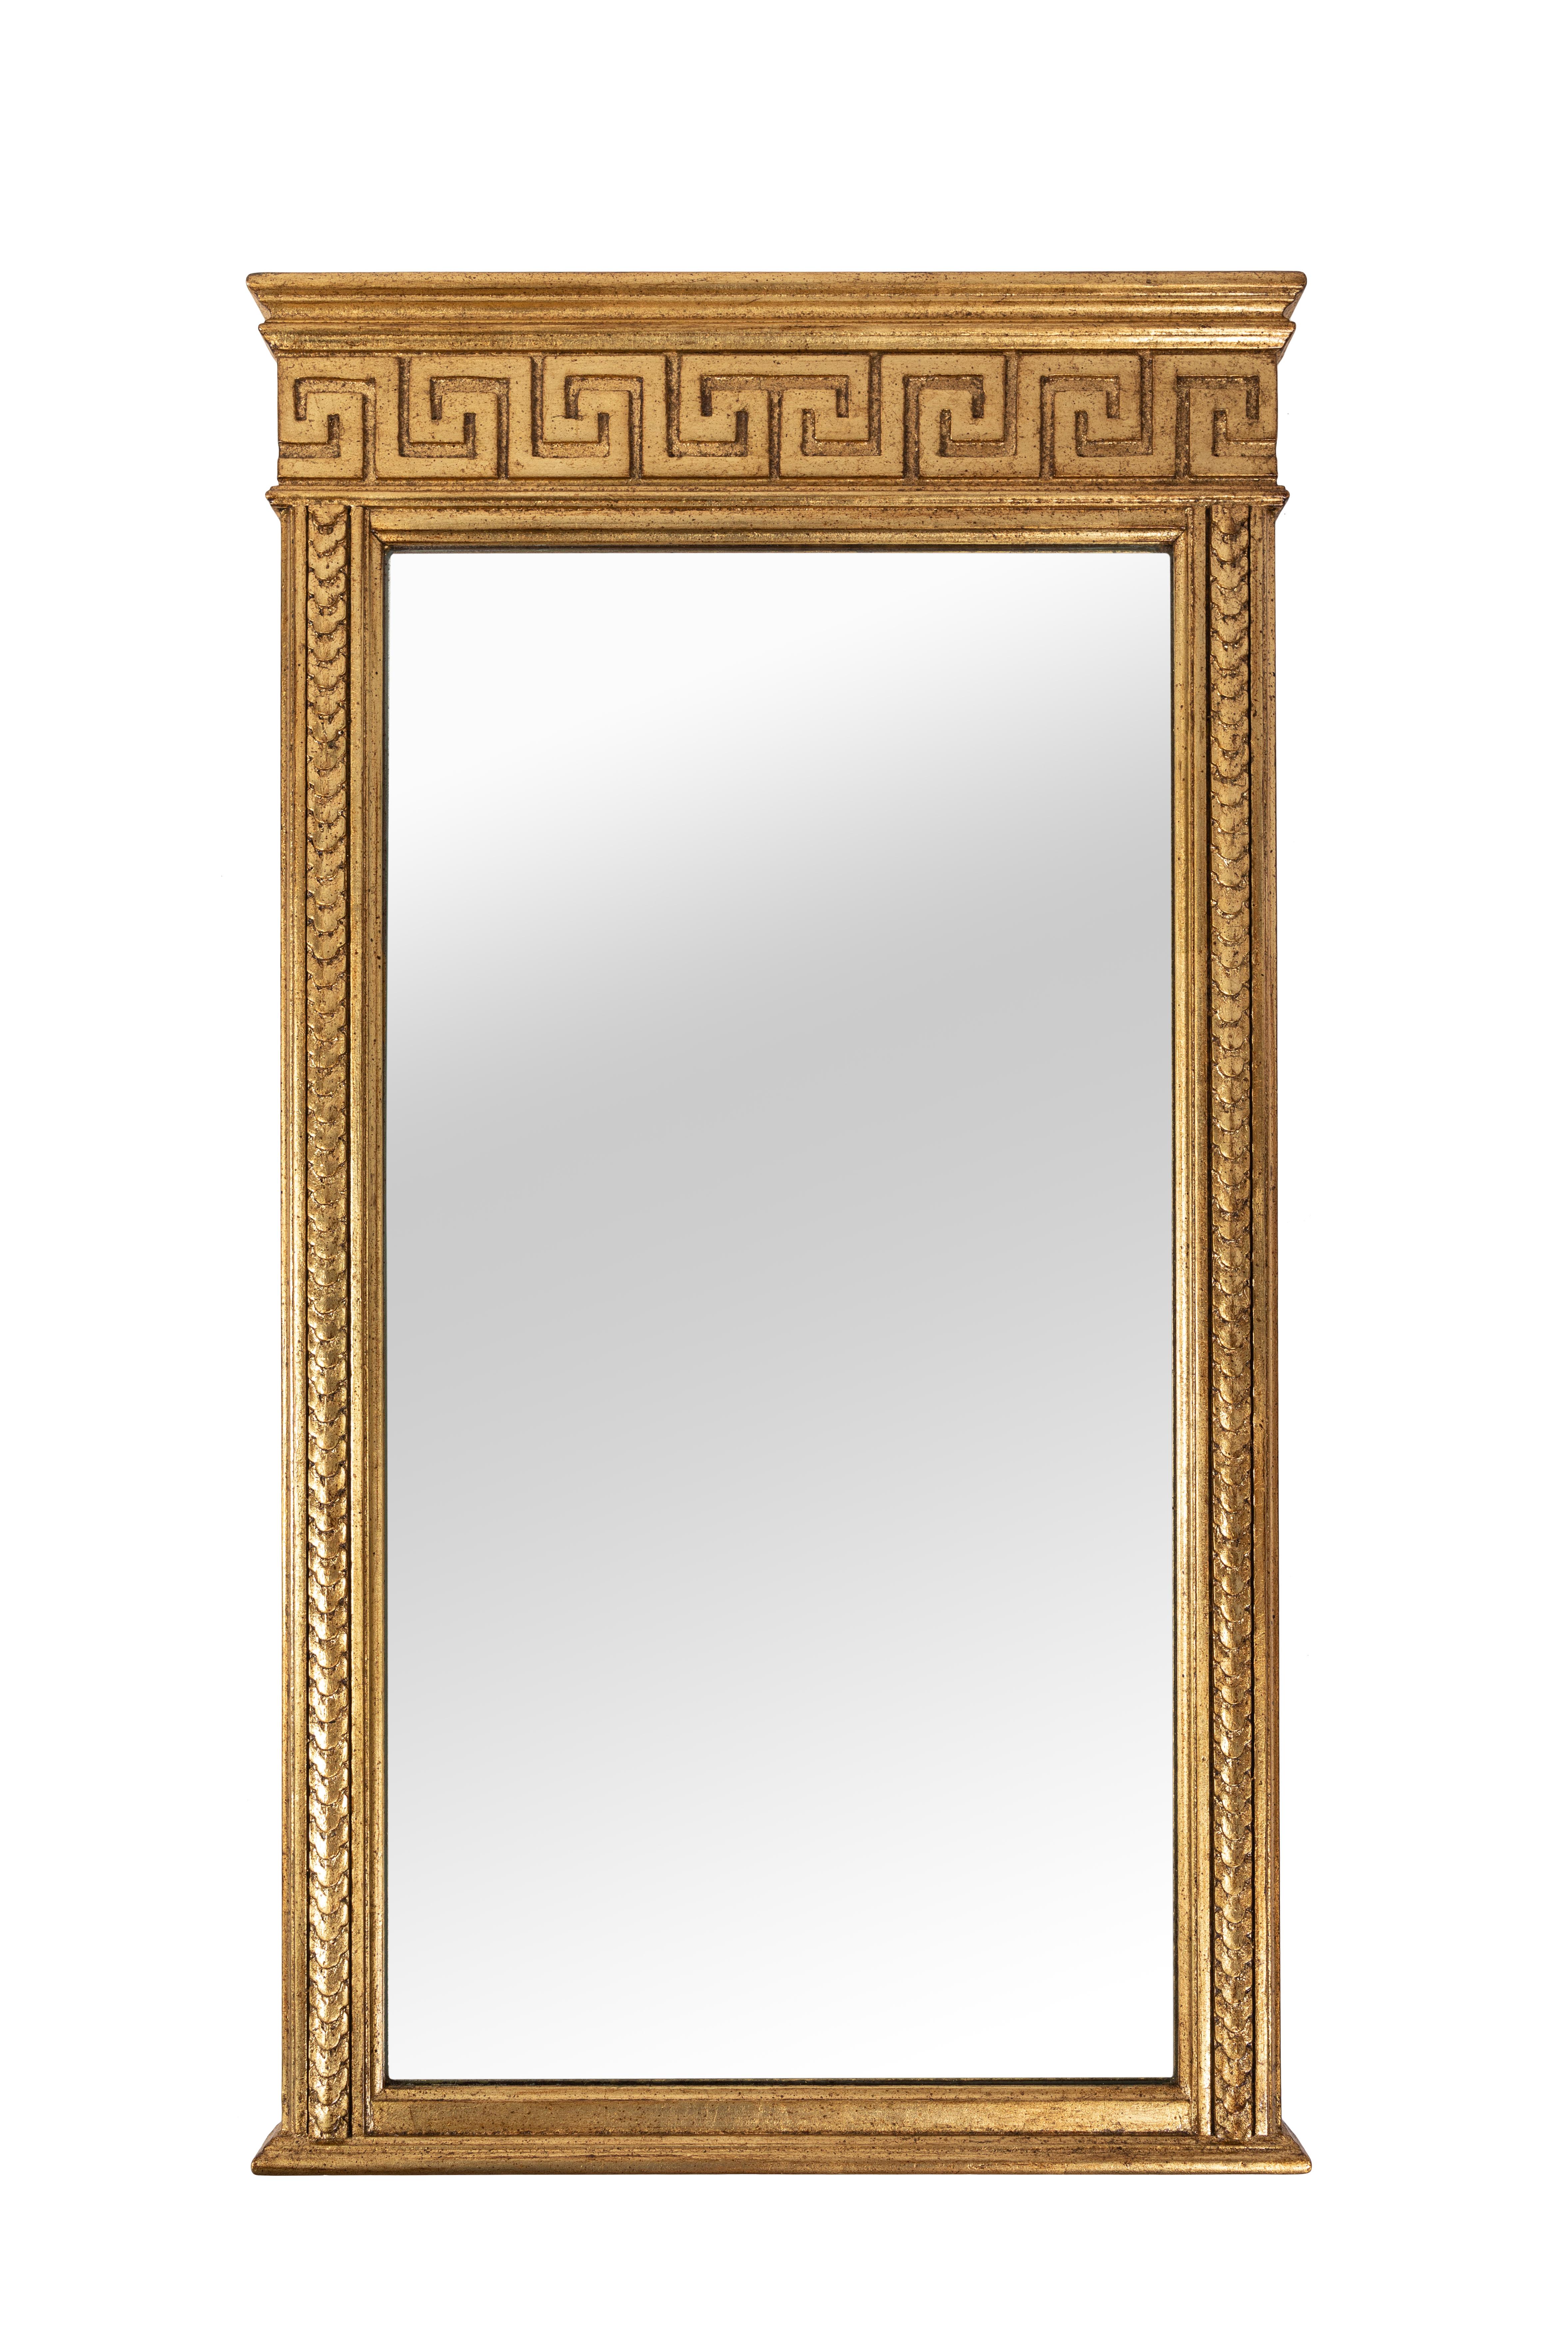 Beautiful pair of Italian neoclassic style giltwood mirrors with Greek key detailing. Wood with gilt finish. Marked 